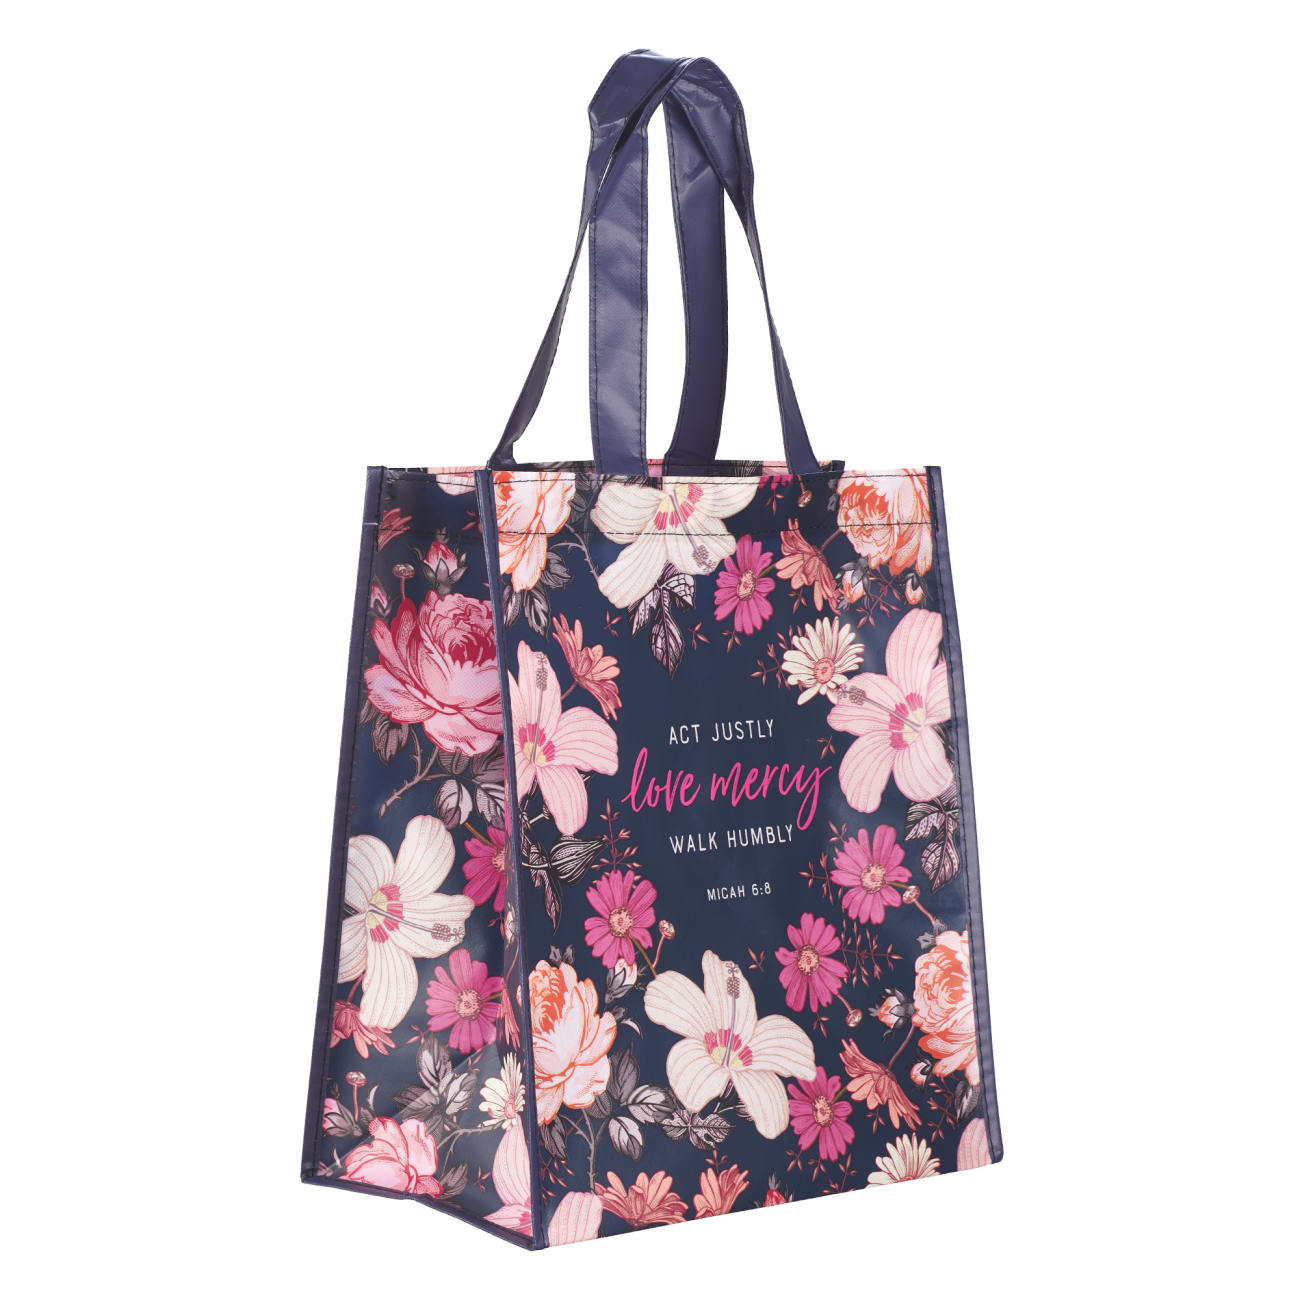 Non-Woven Tote Bag: Mercy Remains, Navy, Pink/Red Floral Soft Goods